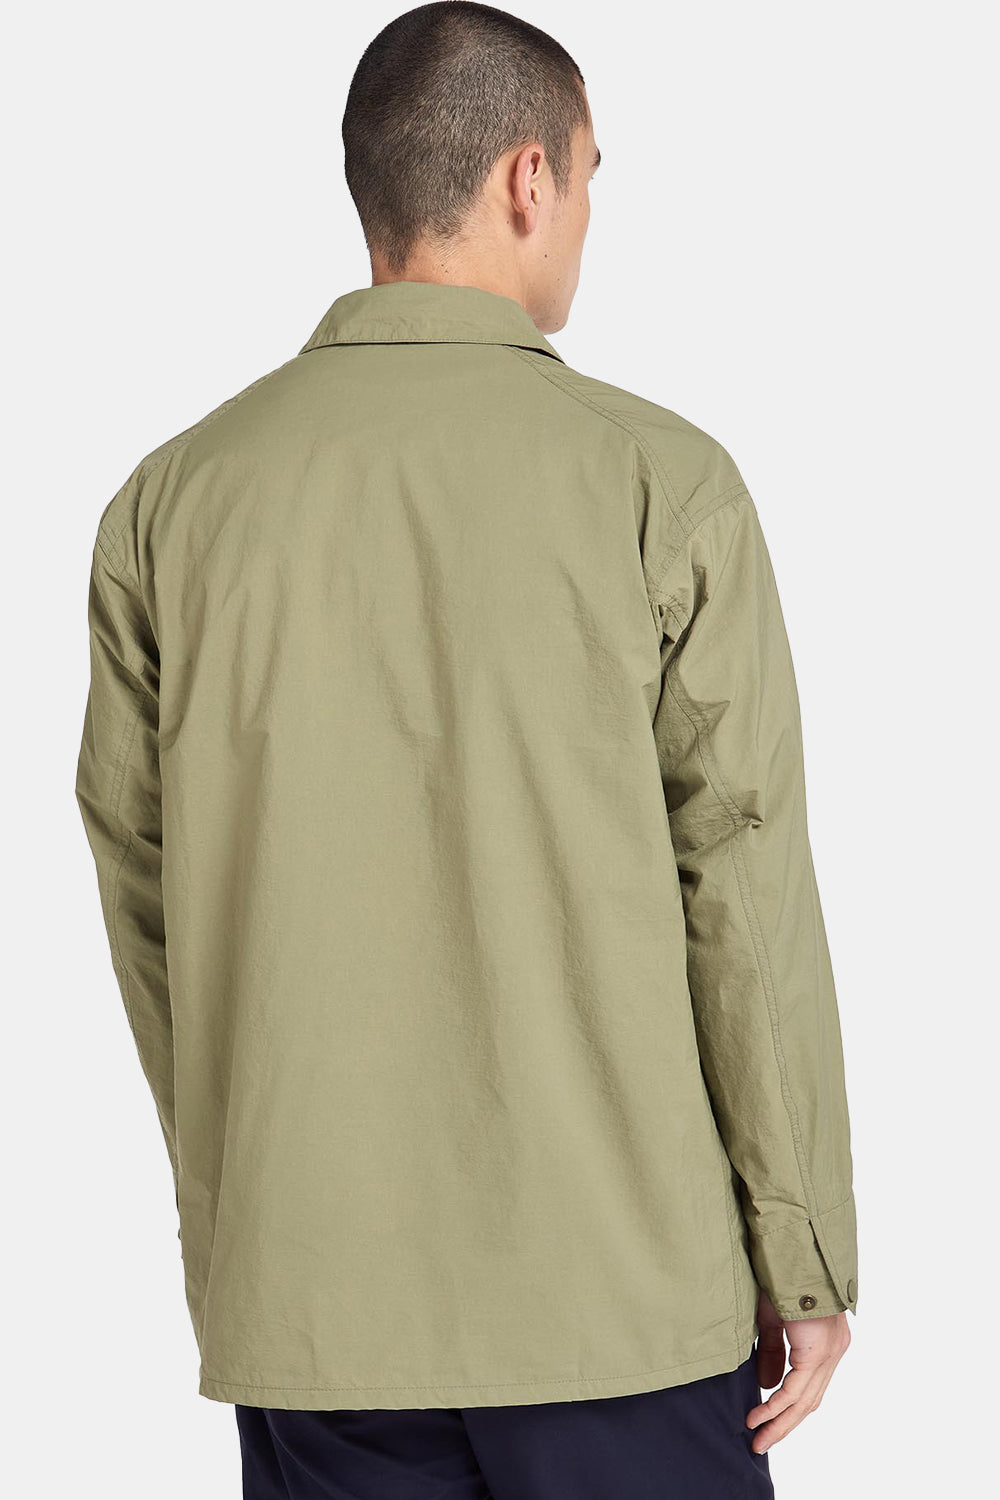 Barbour White Label Kyoto Casual (Bleached Olive)